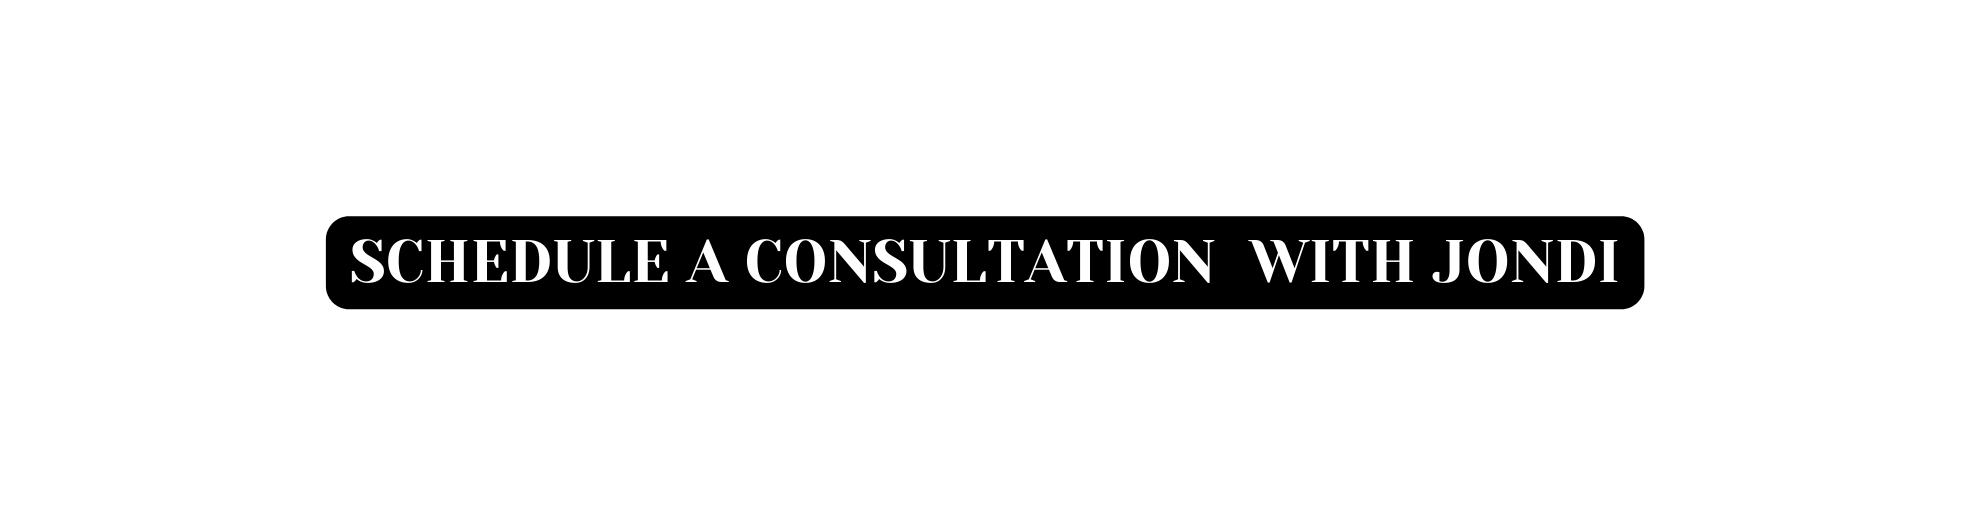 Schedule A Consultation With JONDI